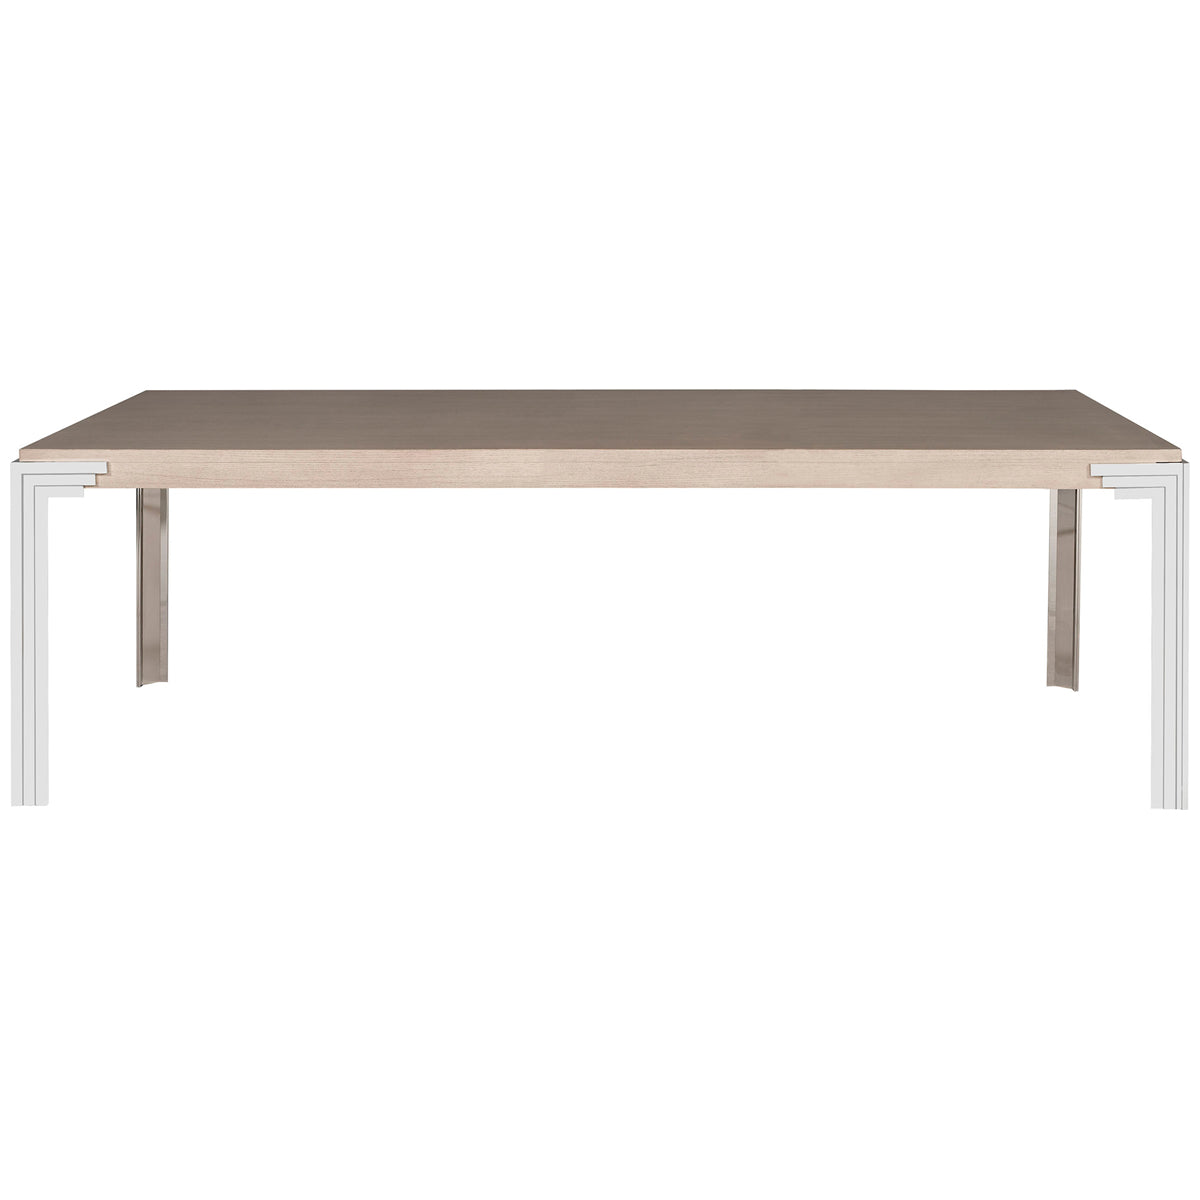 Vanguard Furniture Deco Dining Table with Metal Deco Leg